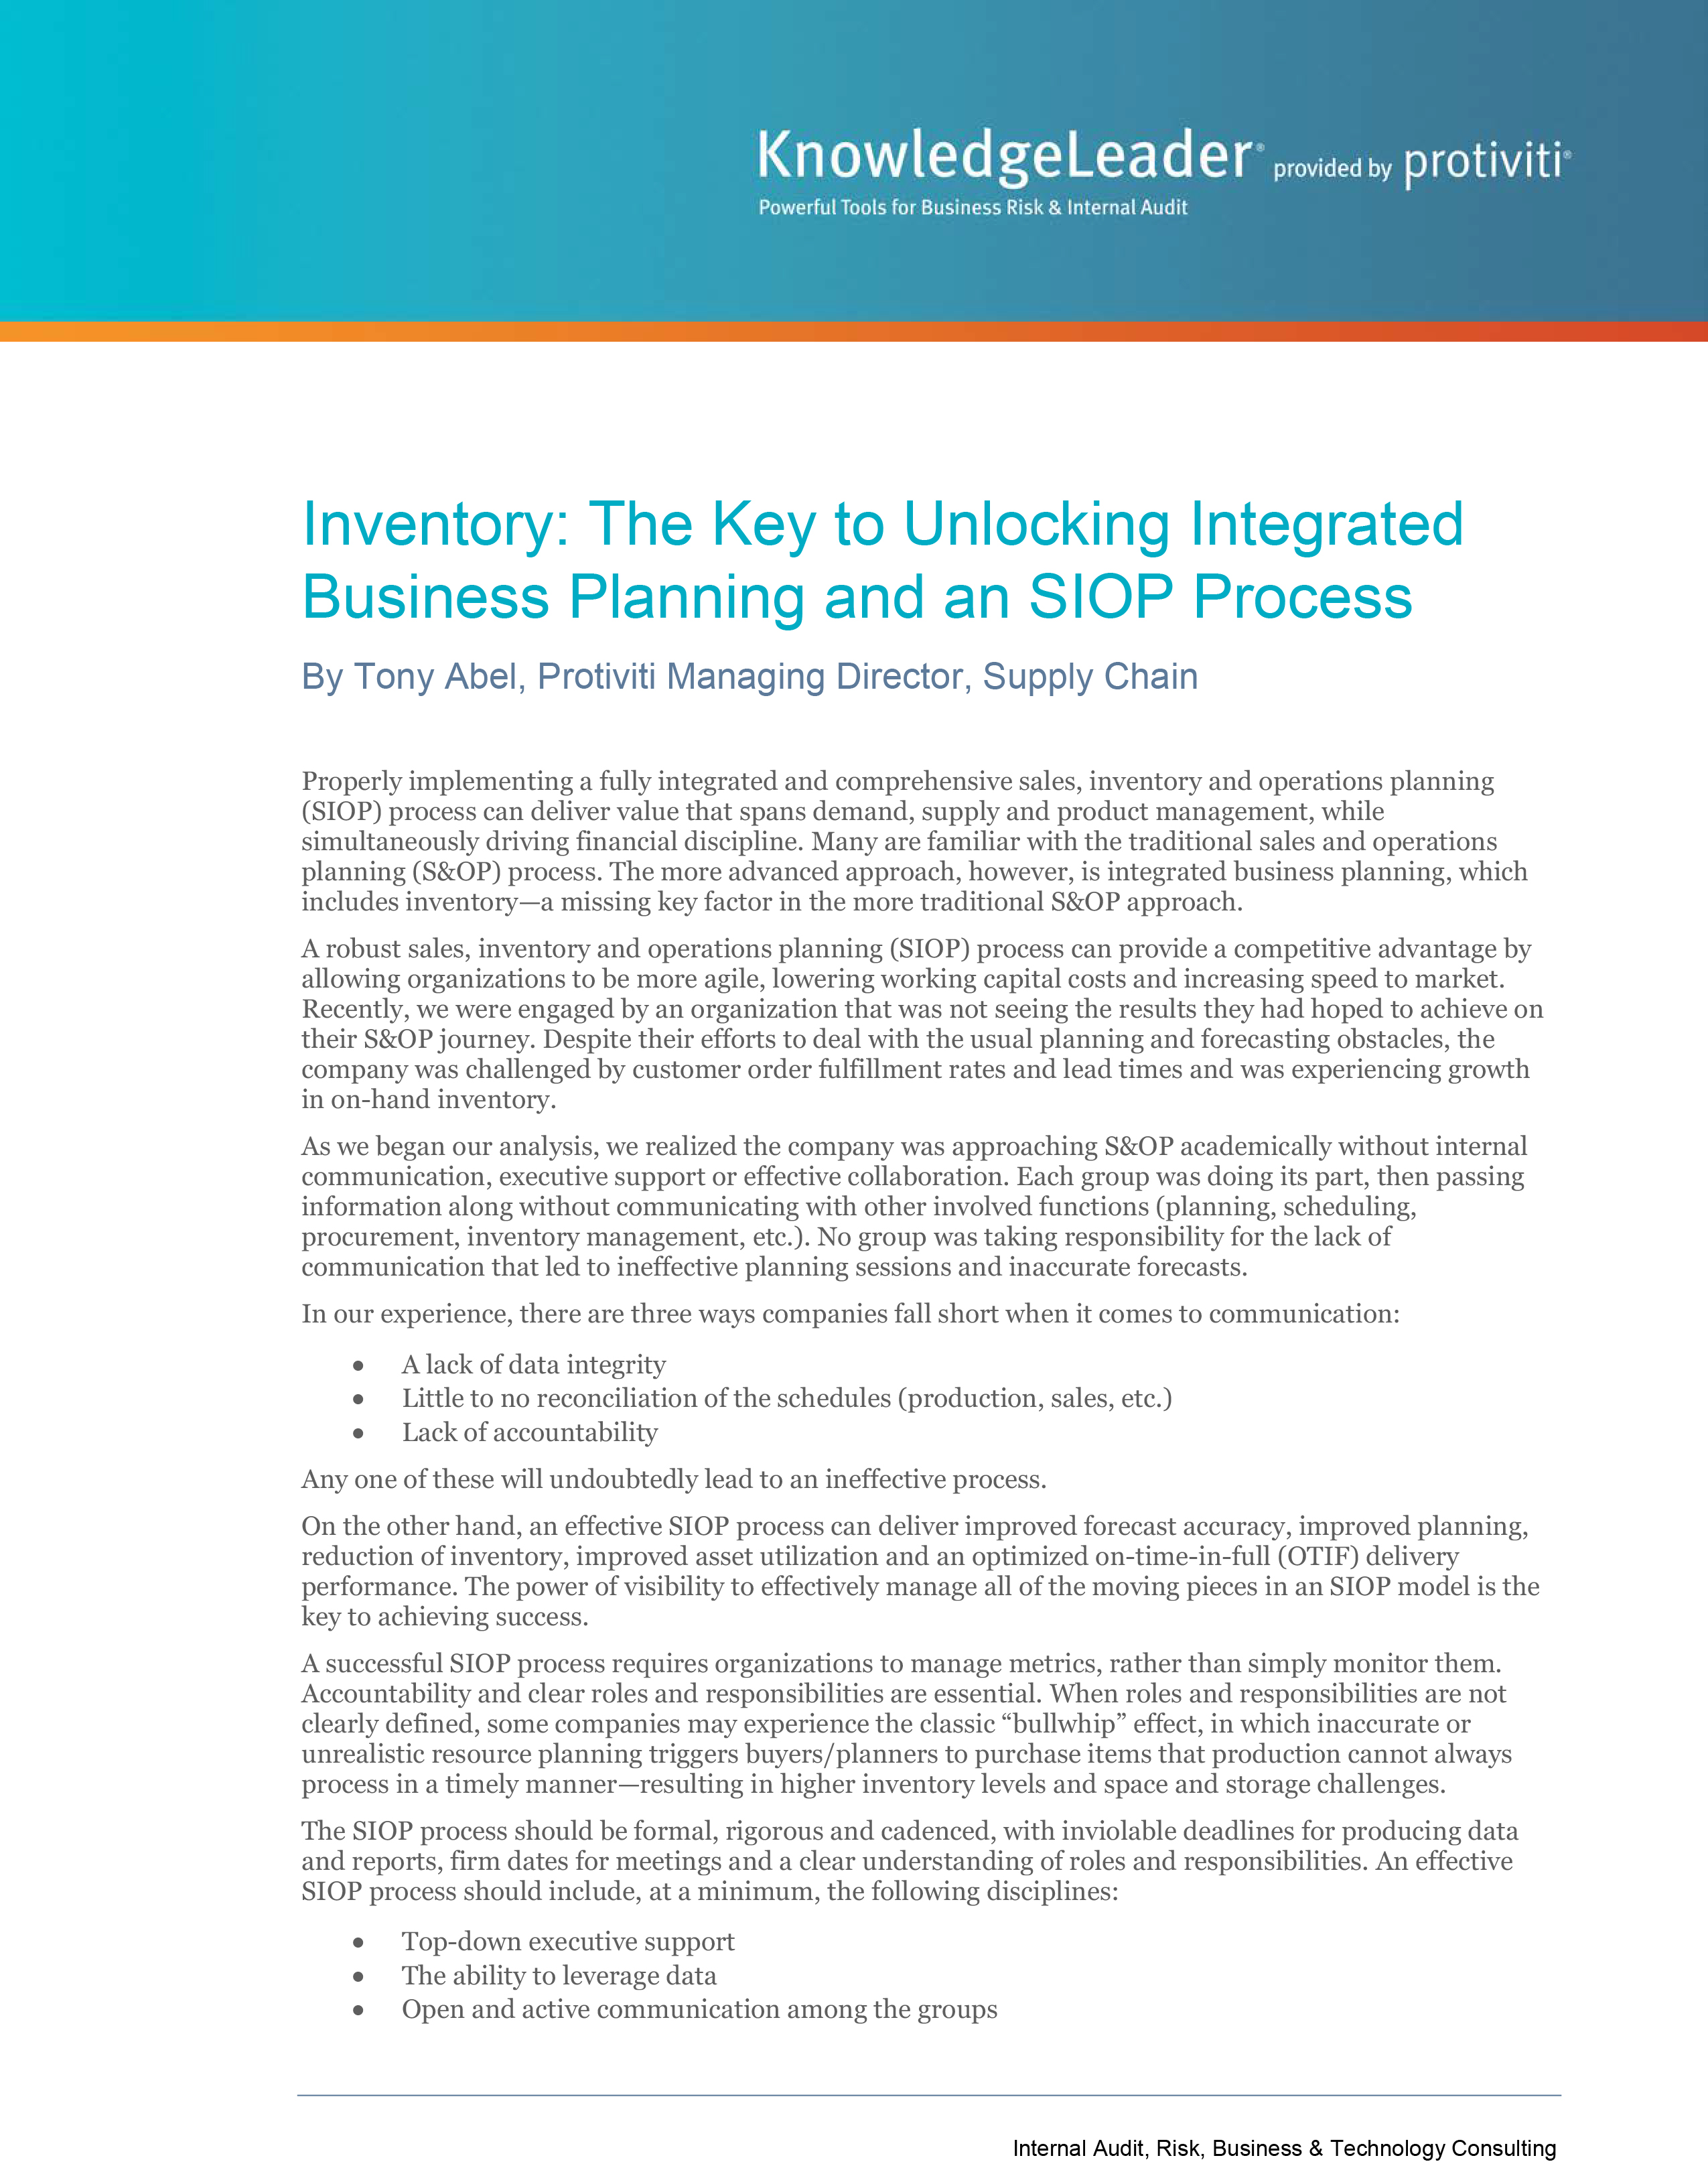 Screenshot of the first page of Inventory - The Key to Unlocking Integrated Business Planning and an SIOP Process